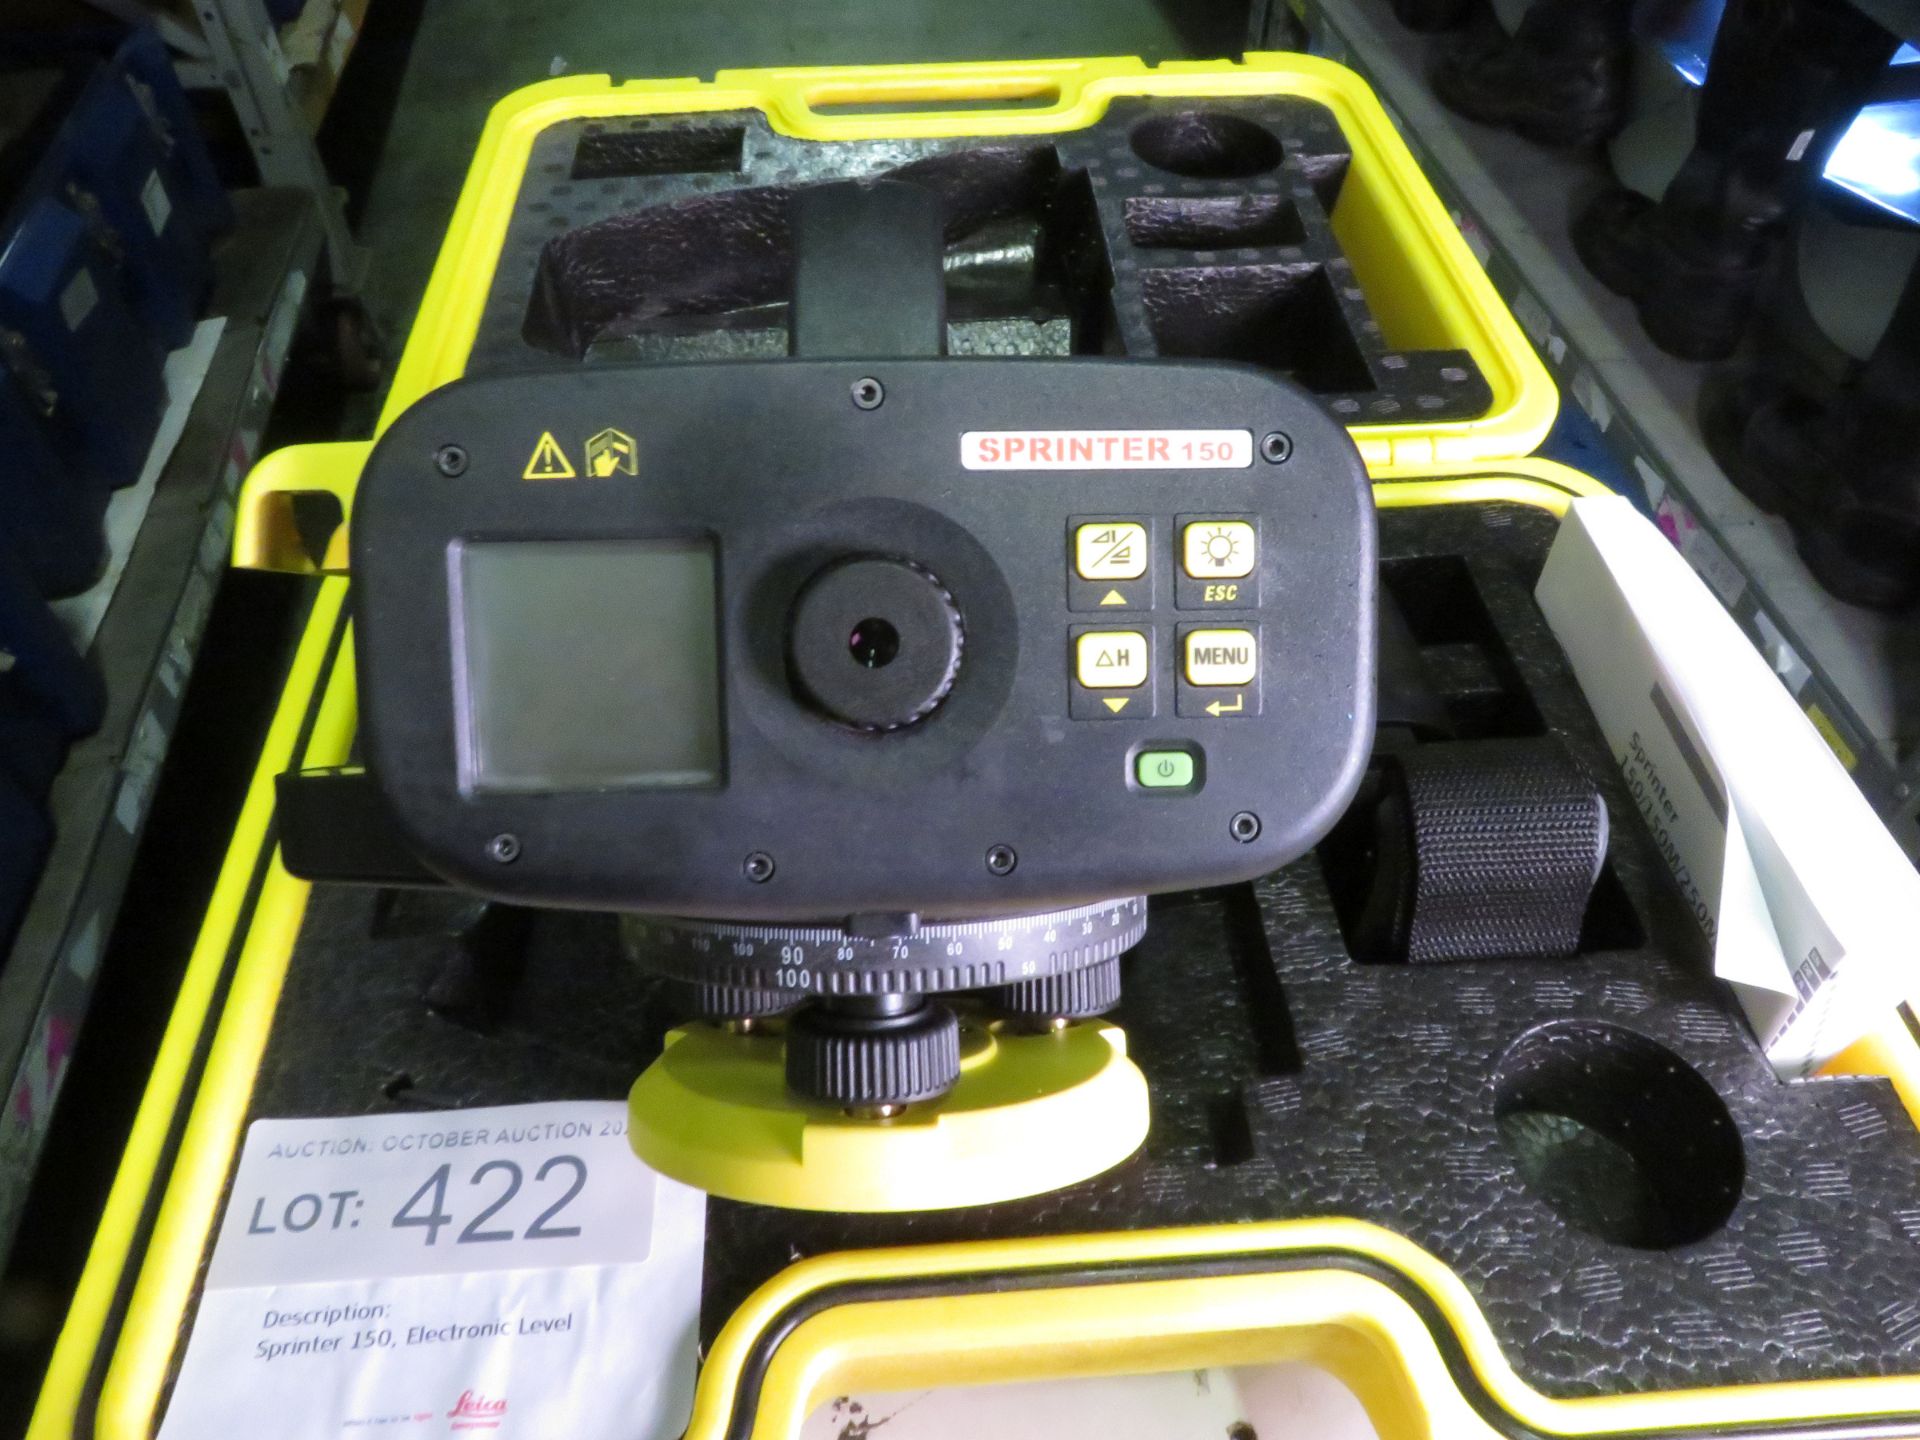 Leica Sprinter 150 Geosystems Electronic Level - Image 2 of 3